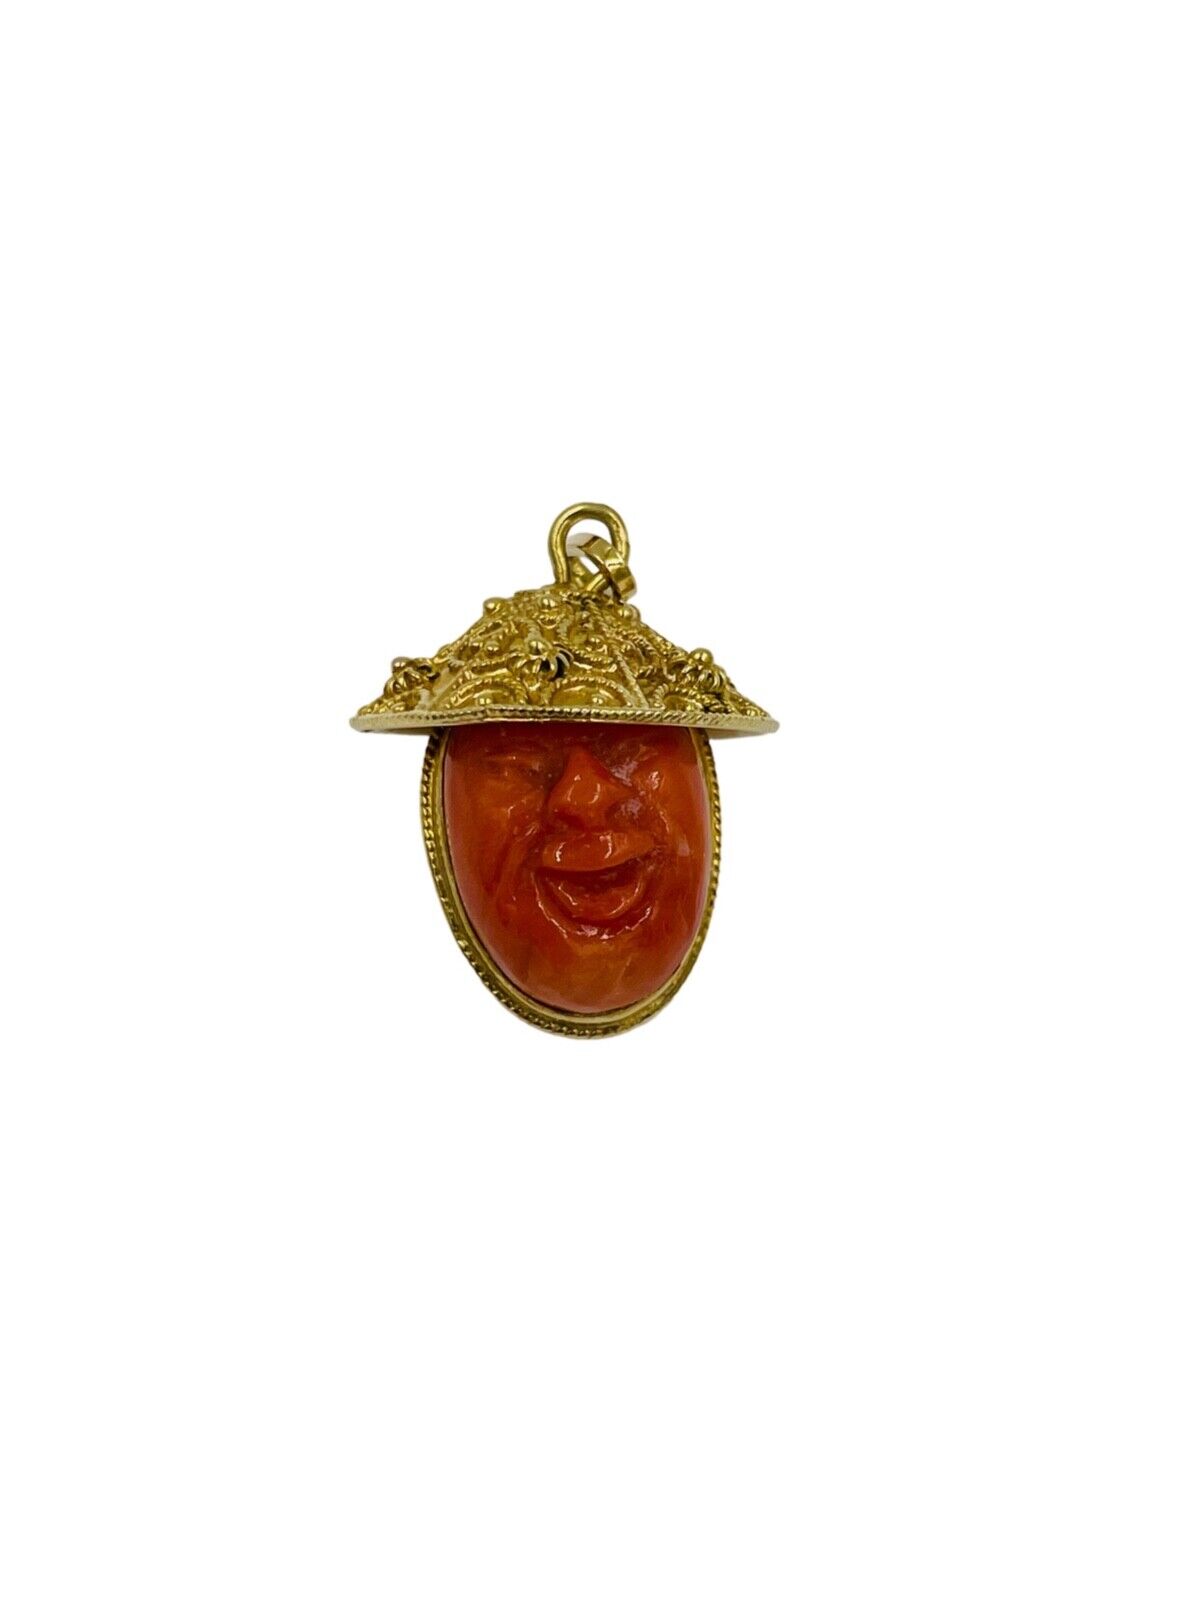 Unique 18K Yellow Gold Carved Asian Double sided Face Red Coral Pendant Charm